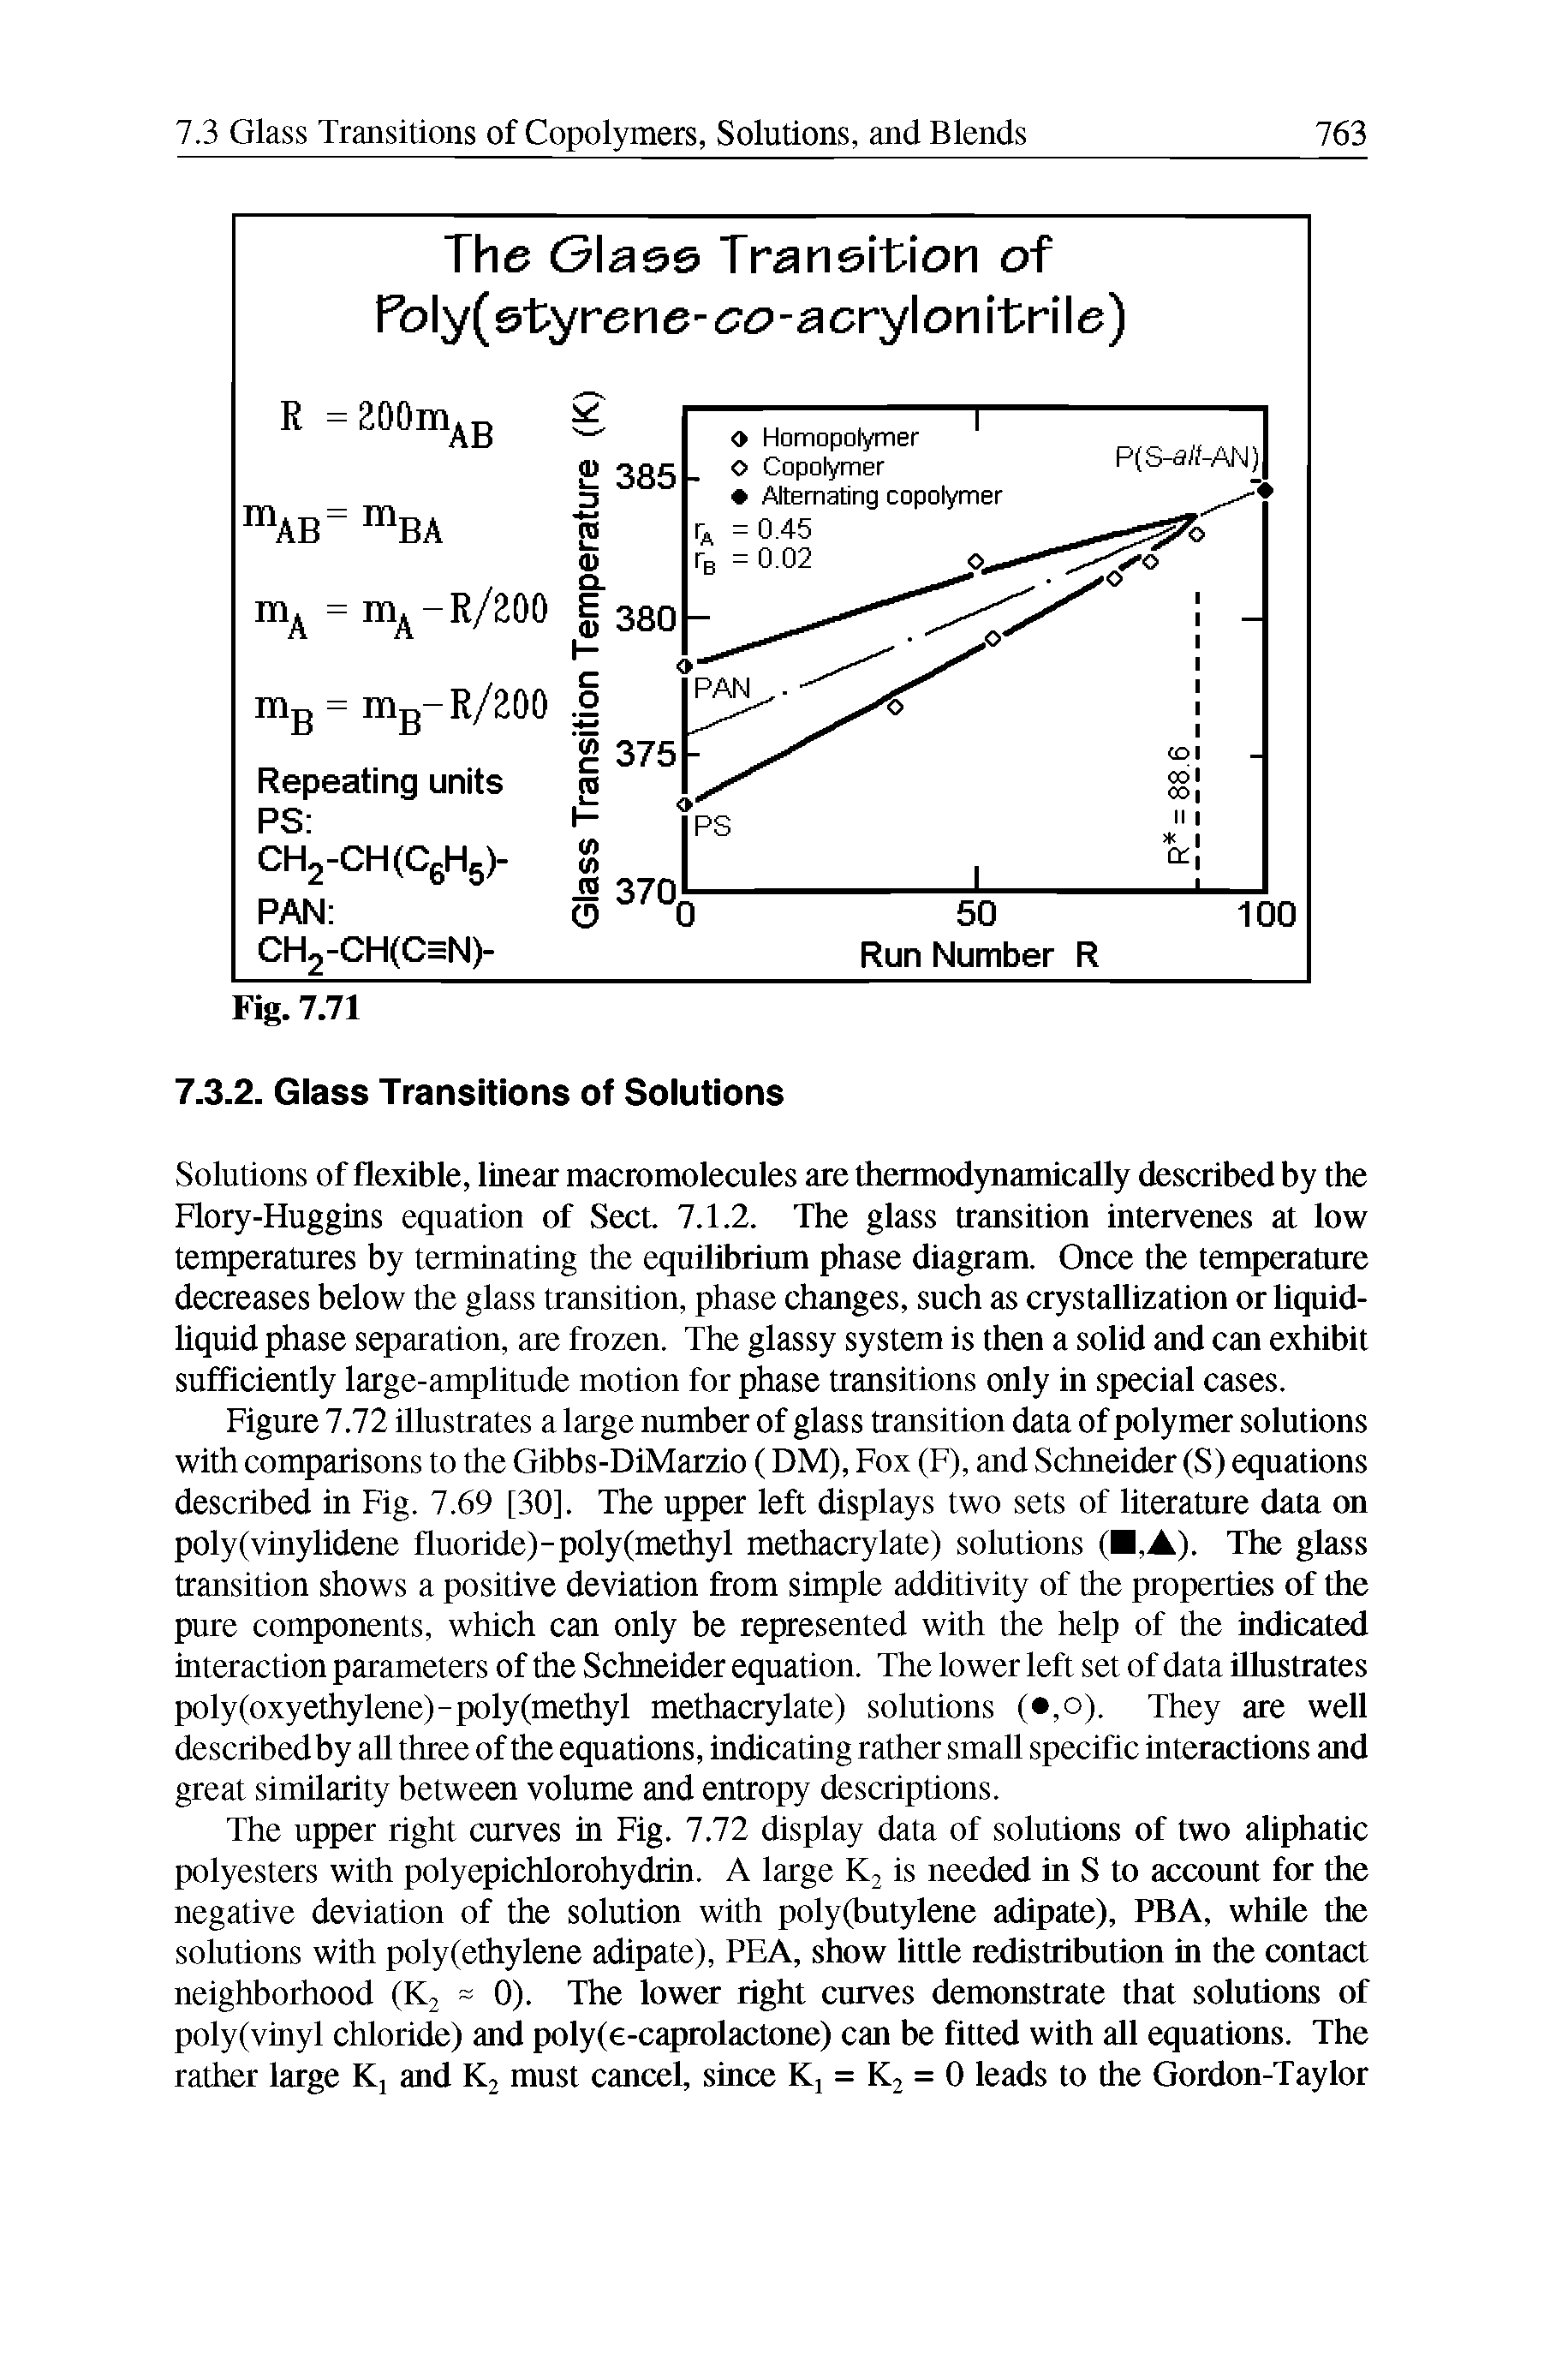 Figure 7.72 illustrates a large number of glass transition data of polymer solutions with comparisons to the Gibbs-DiMarzio (DM), Fox (F), and Schneider (S) equations described in Fig. 7.69 [30]. The upper left displays two sets of literature data on poly(vinylidene fluoride)-poly(methyl methacrylate) solutions (B,A). The glass transition shows a positive deviation from simple additivity of the properties of the pure components, which can only be represented with the help of the indicated interaction parameters of the Schneider equation. The lower left set of data illustrates poly(oxyethylene)-poly (methyl methacrylate) solutions (, o). They are well described by all three of the equations, indicating rather small specific interactions and great similarity between volume and entropy descriptions.